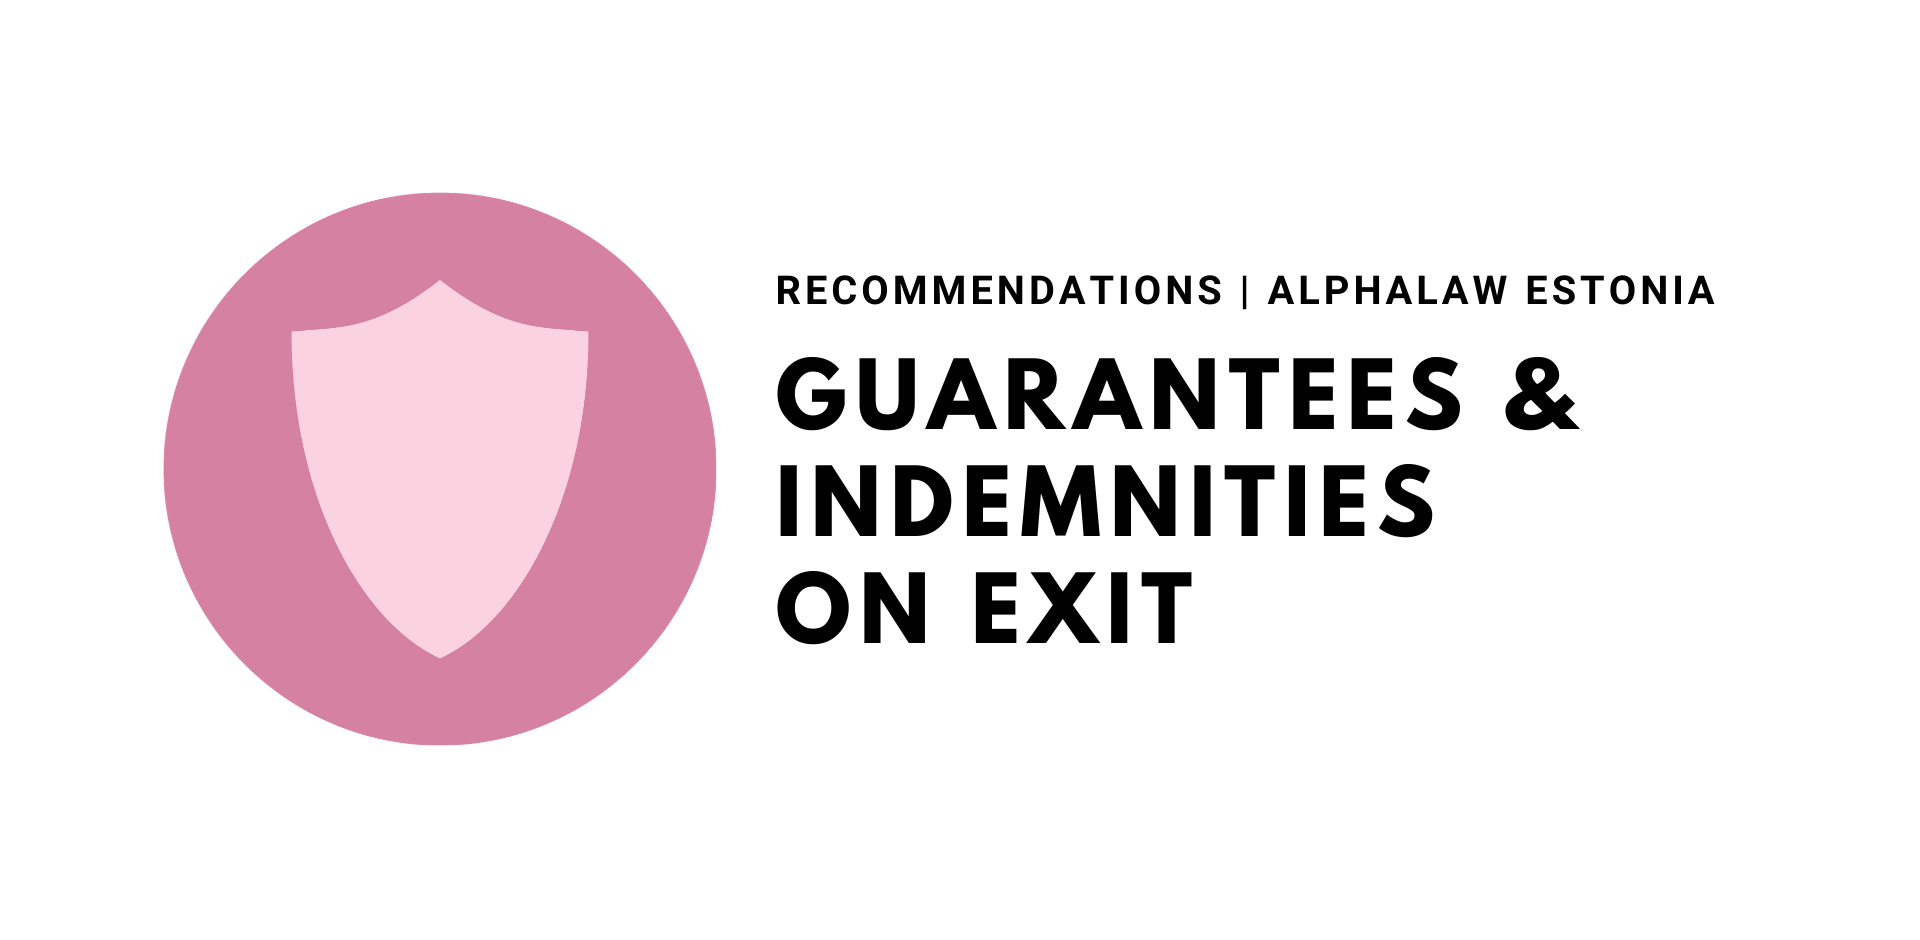 Should Guarantees and Indemnities be Given on Exit?